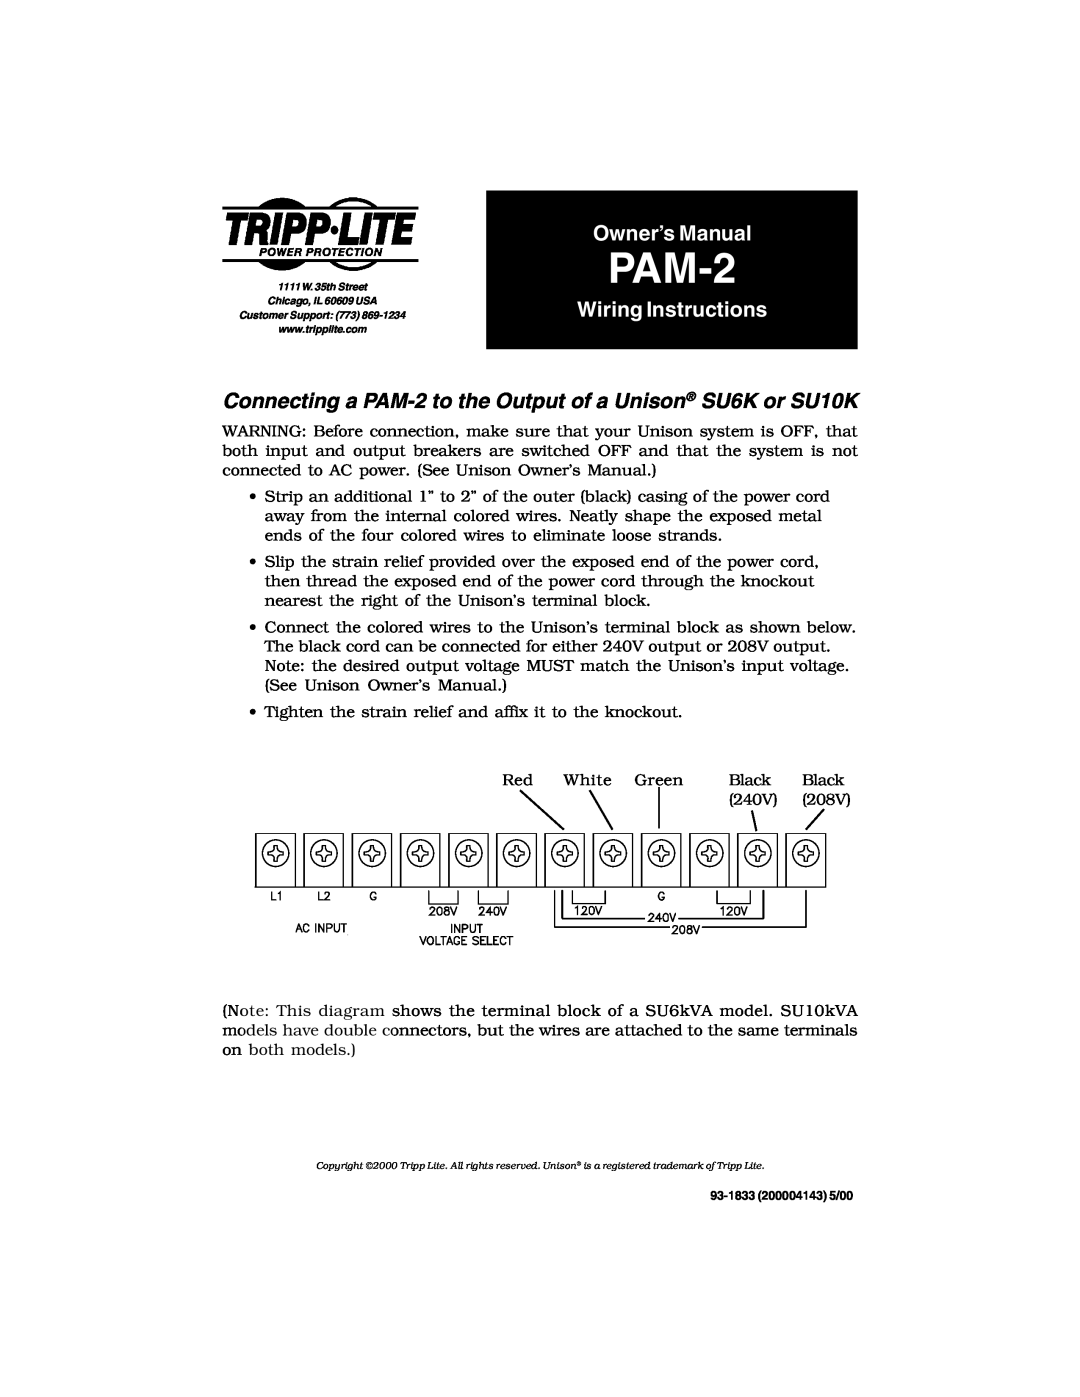 Tripp Lite PAM-2 owner manual Owner’s Manual, Wiring Instructions 